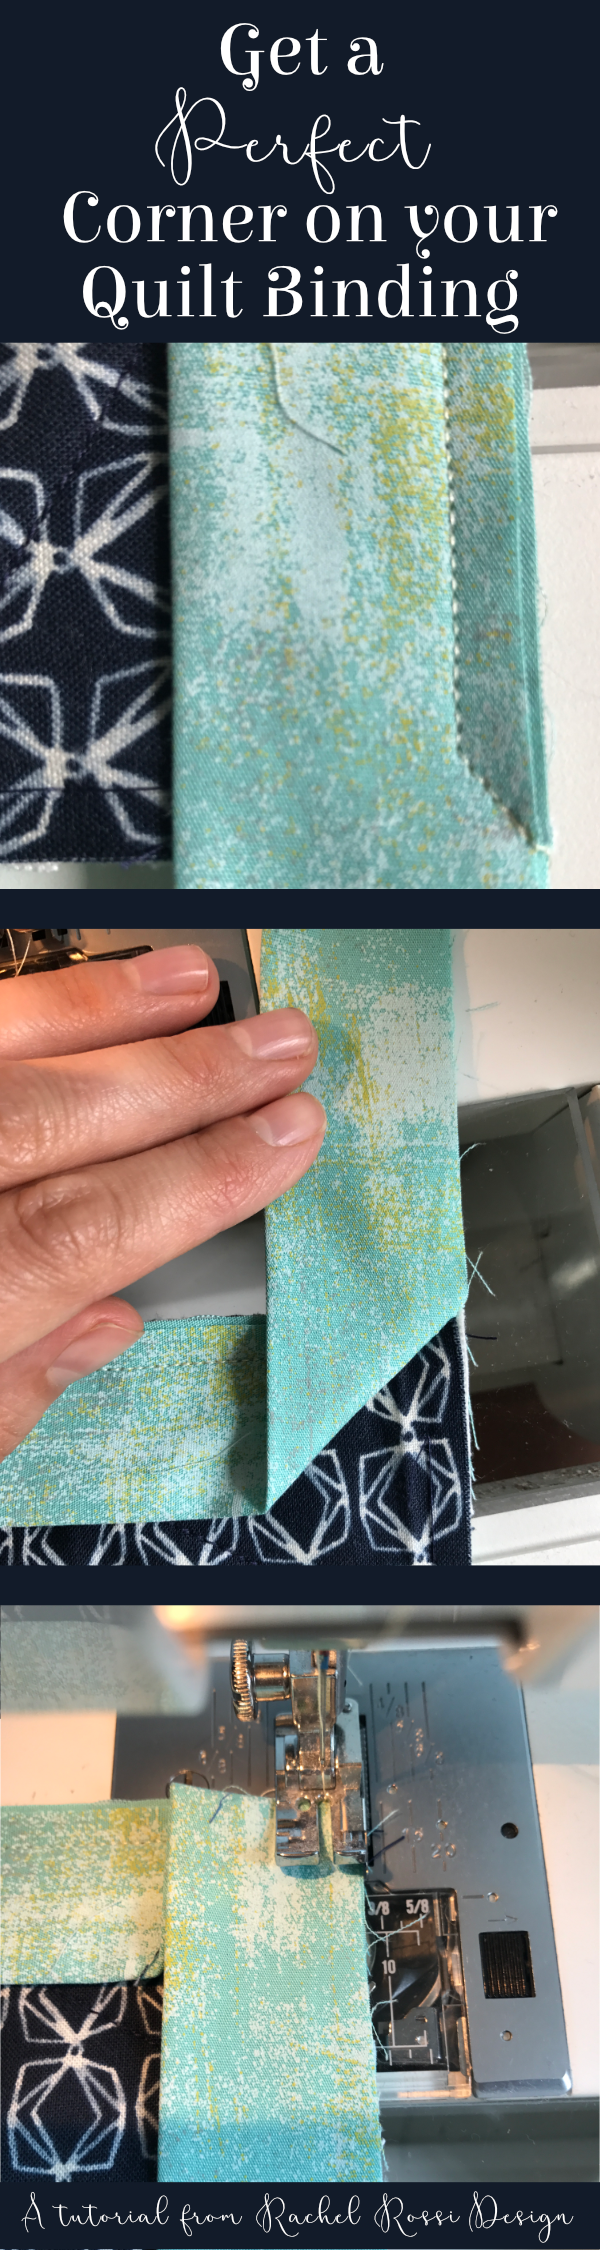 How to Get a Perfect Corner on Your Quilt Binding Tutorial